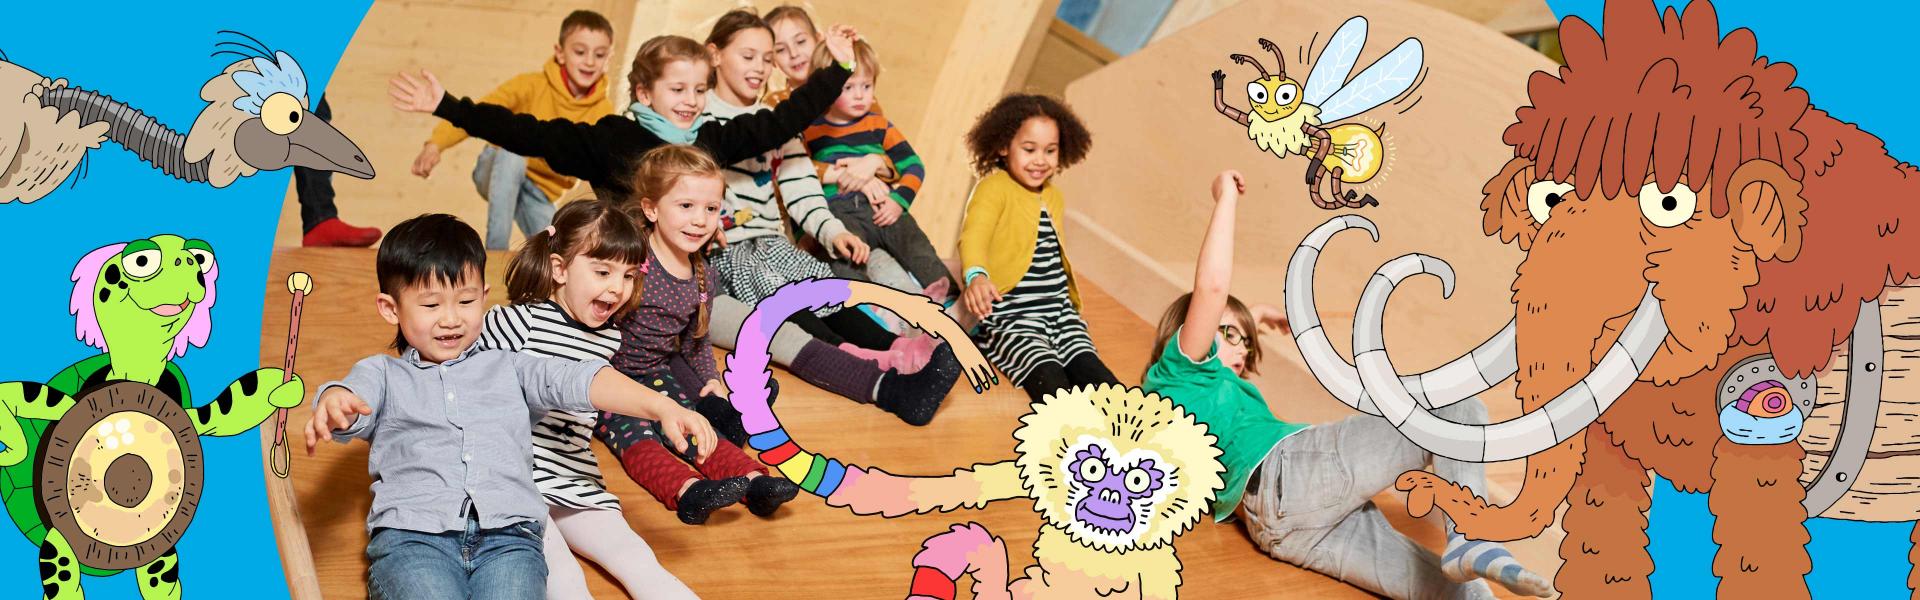 Graphic with colorful animals, photo built in the middle with children sliding down a wooden surface.